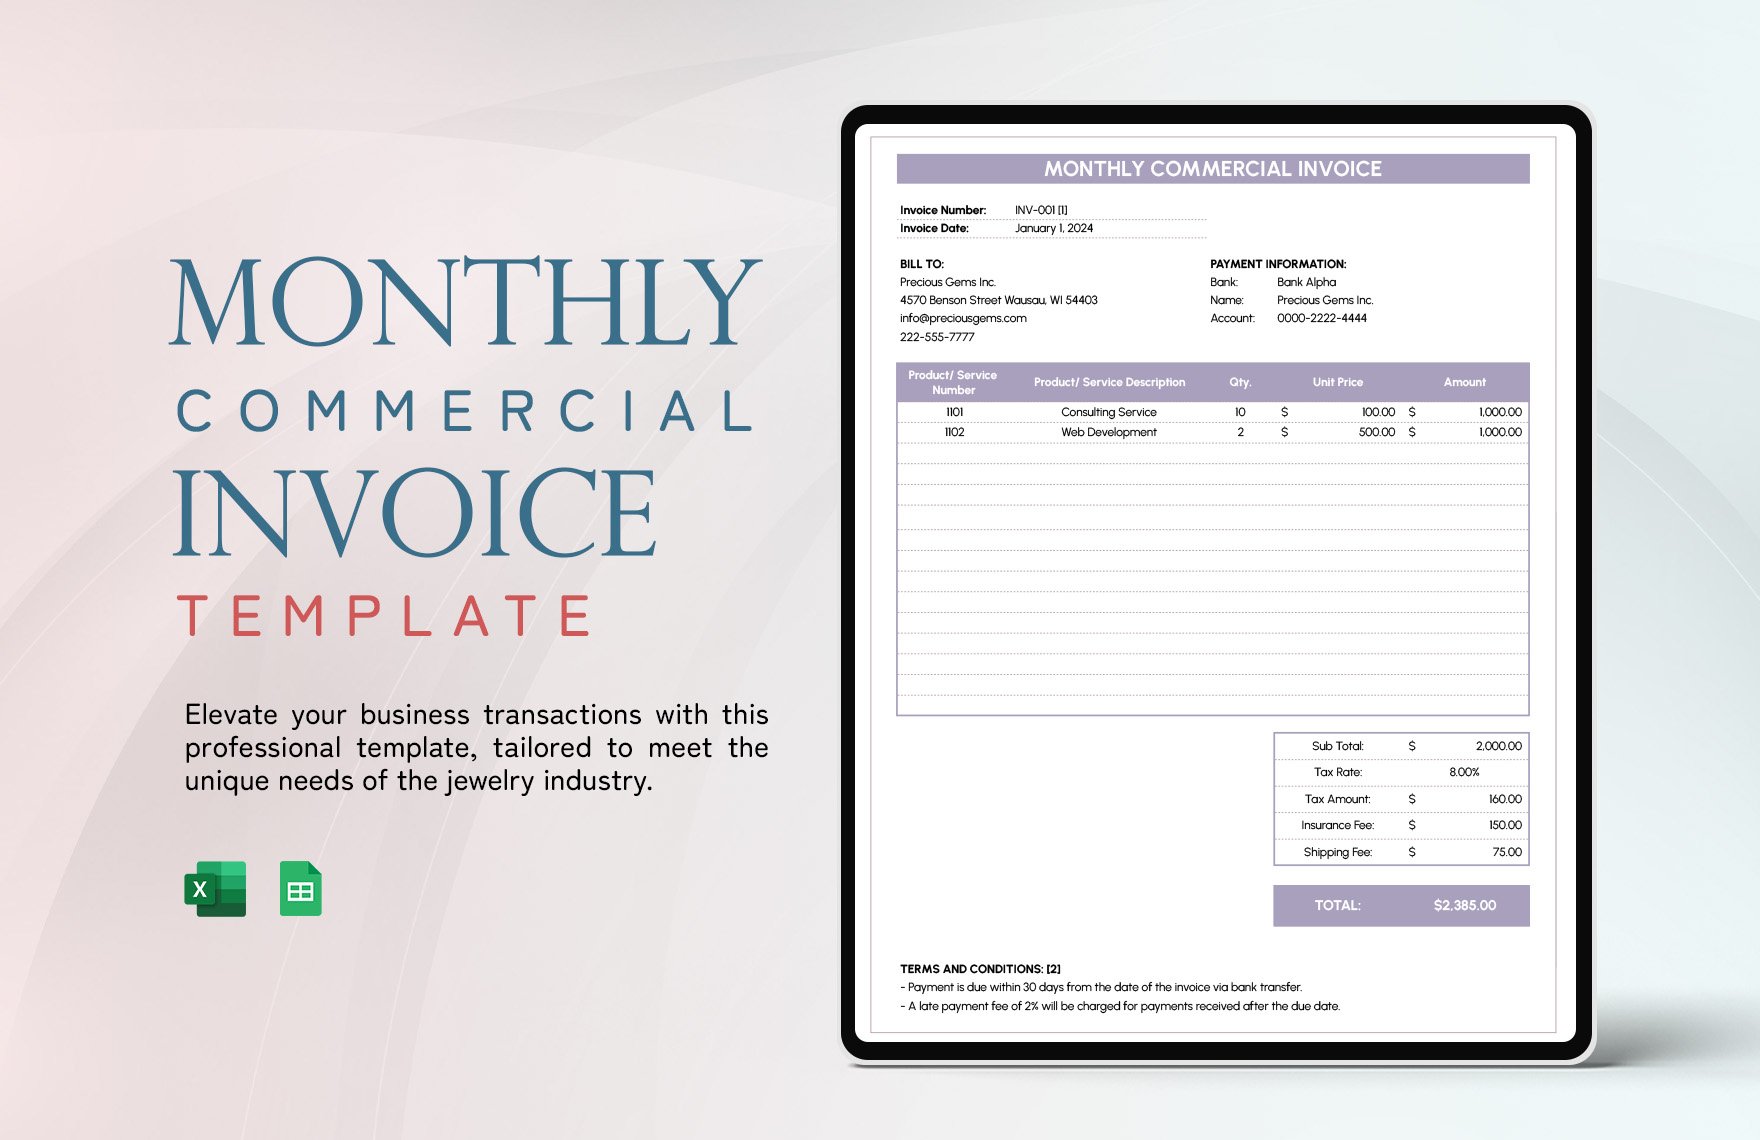 Monthly Commercial Invoice Template